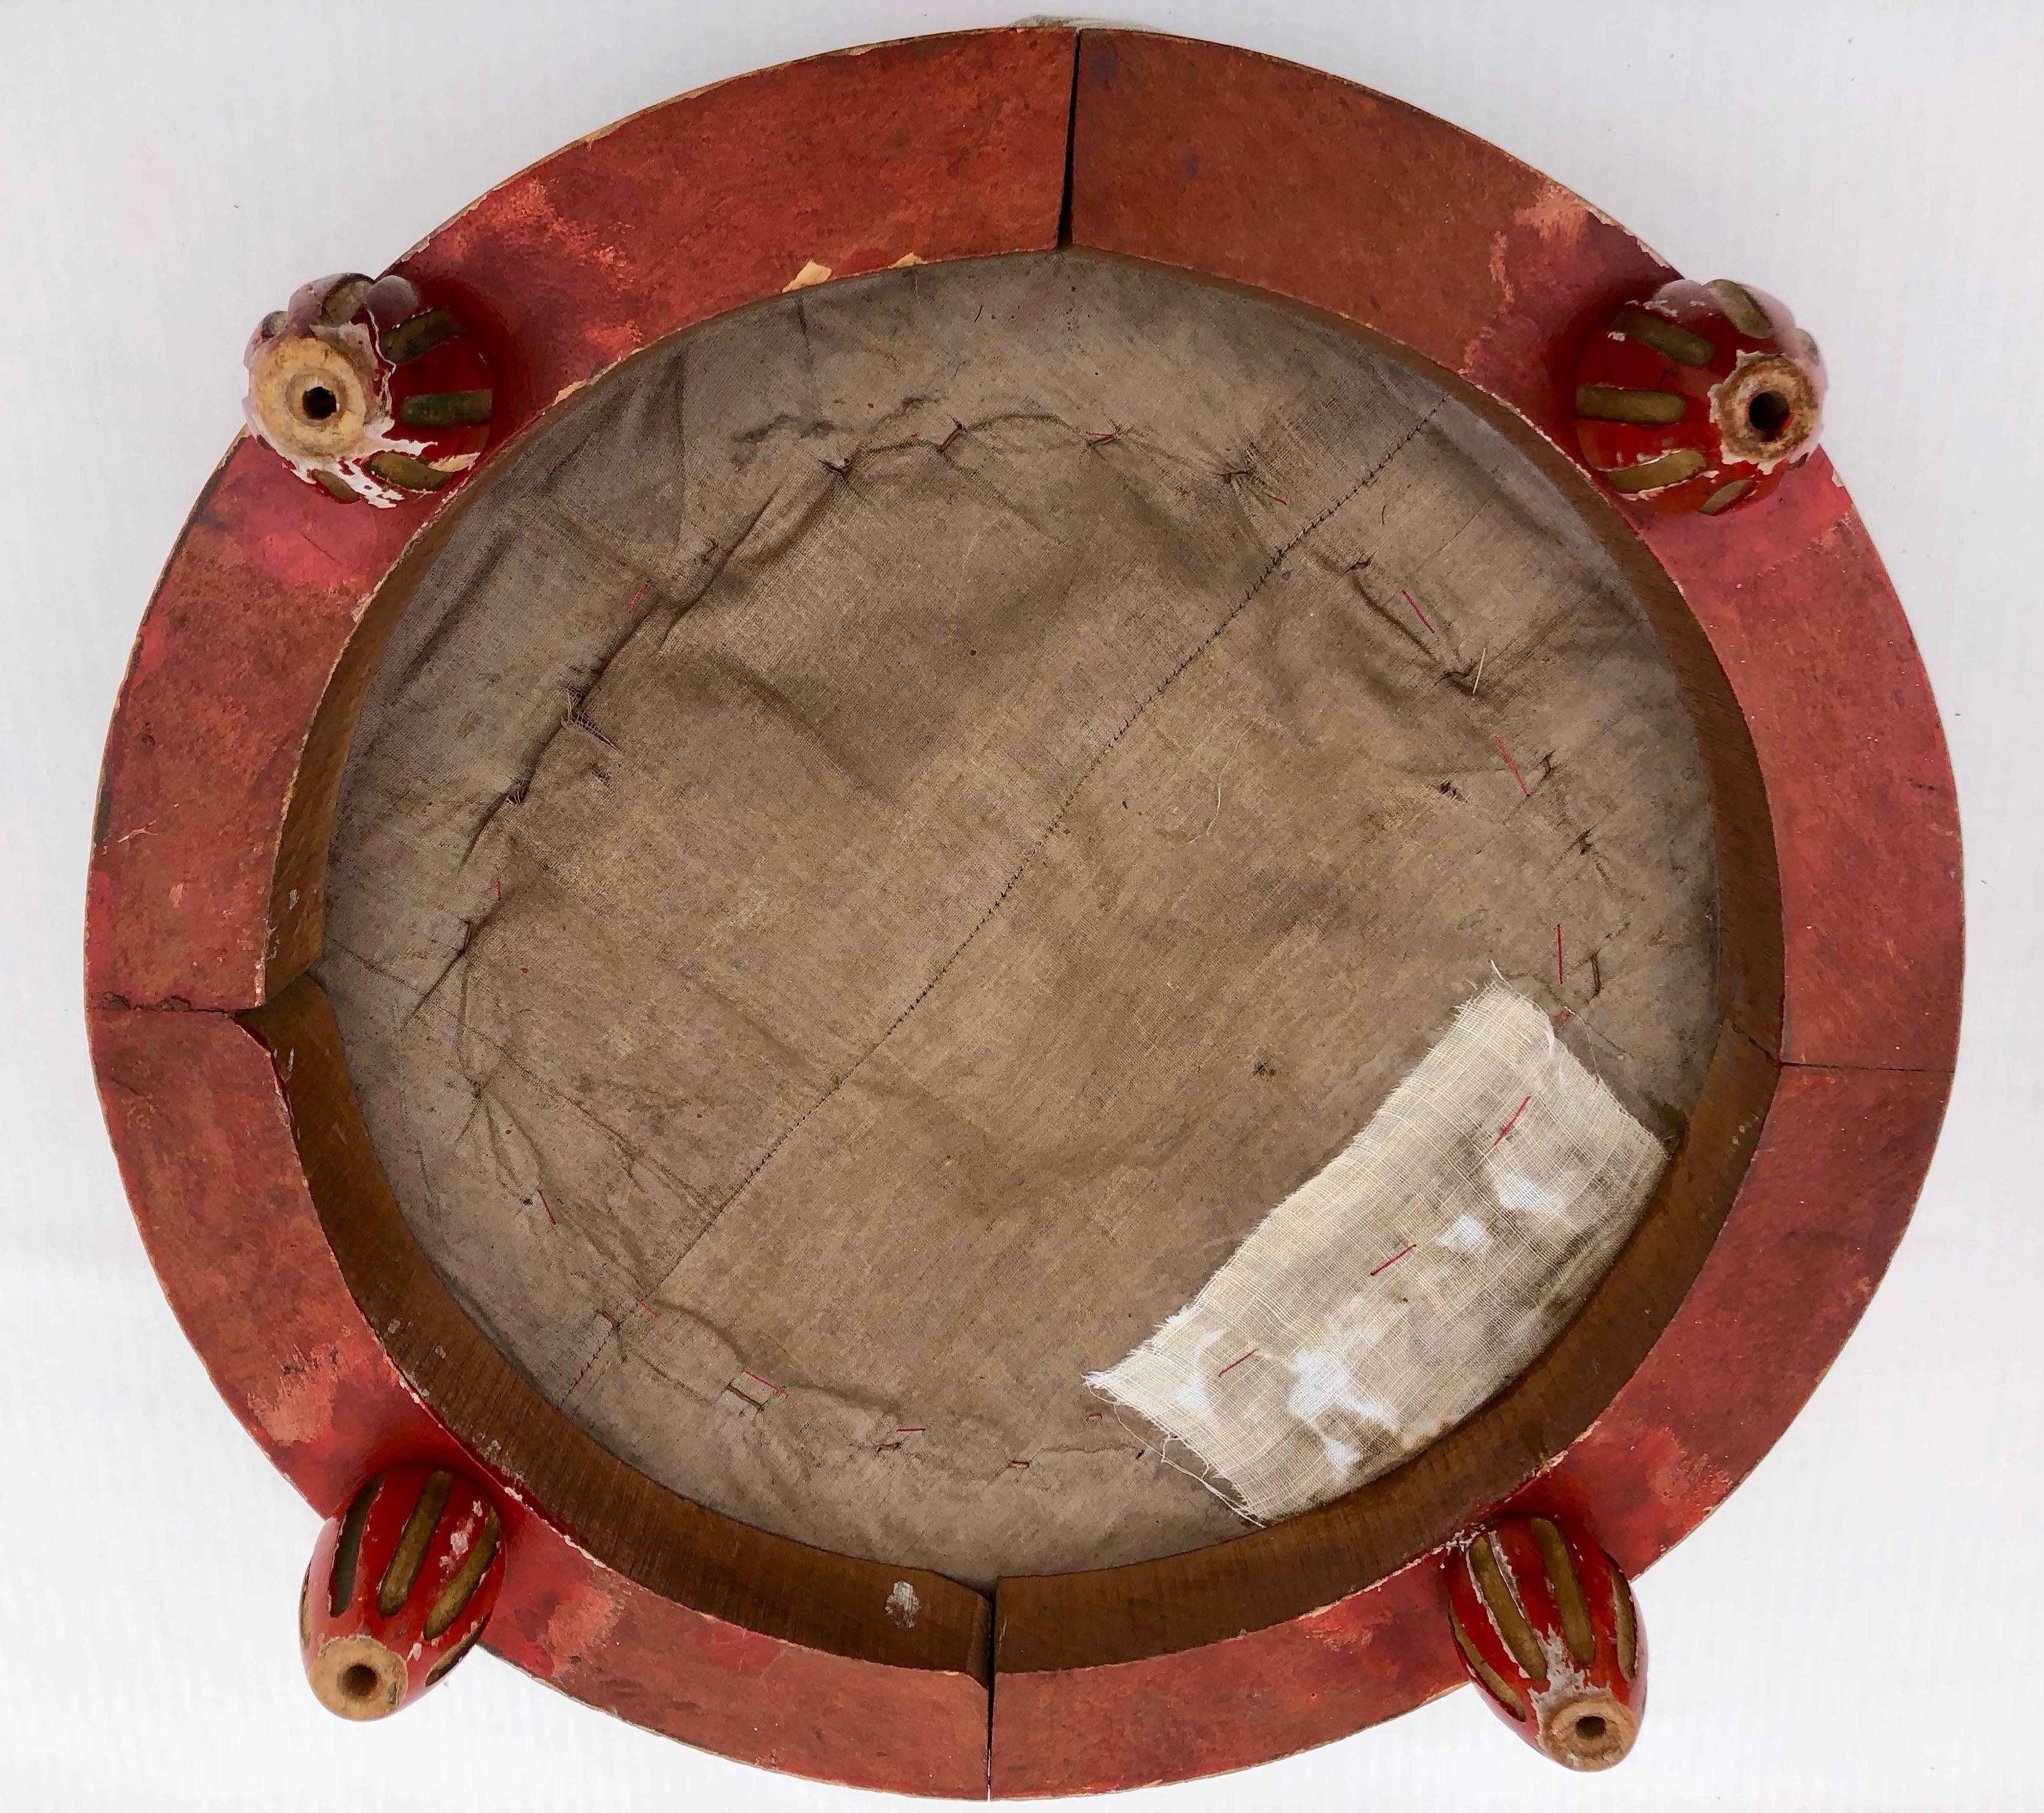 Hand-Painted Two French Round Footstools Padded with Hay, Red Stripe Linen Tops, Late 1800s